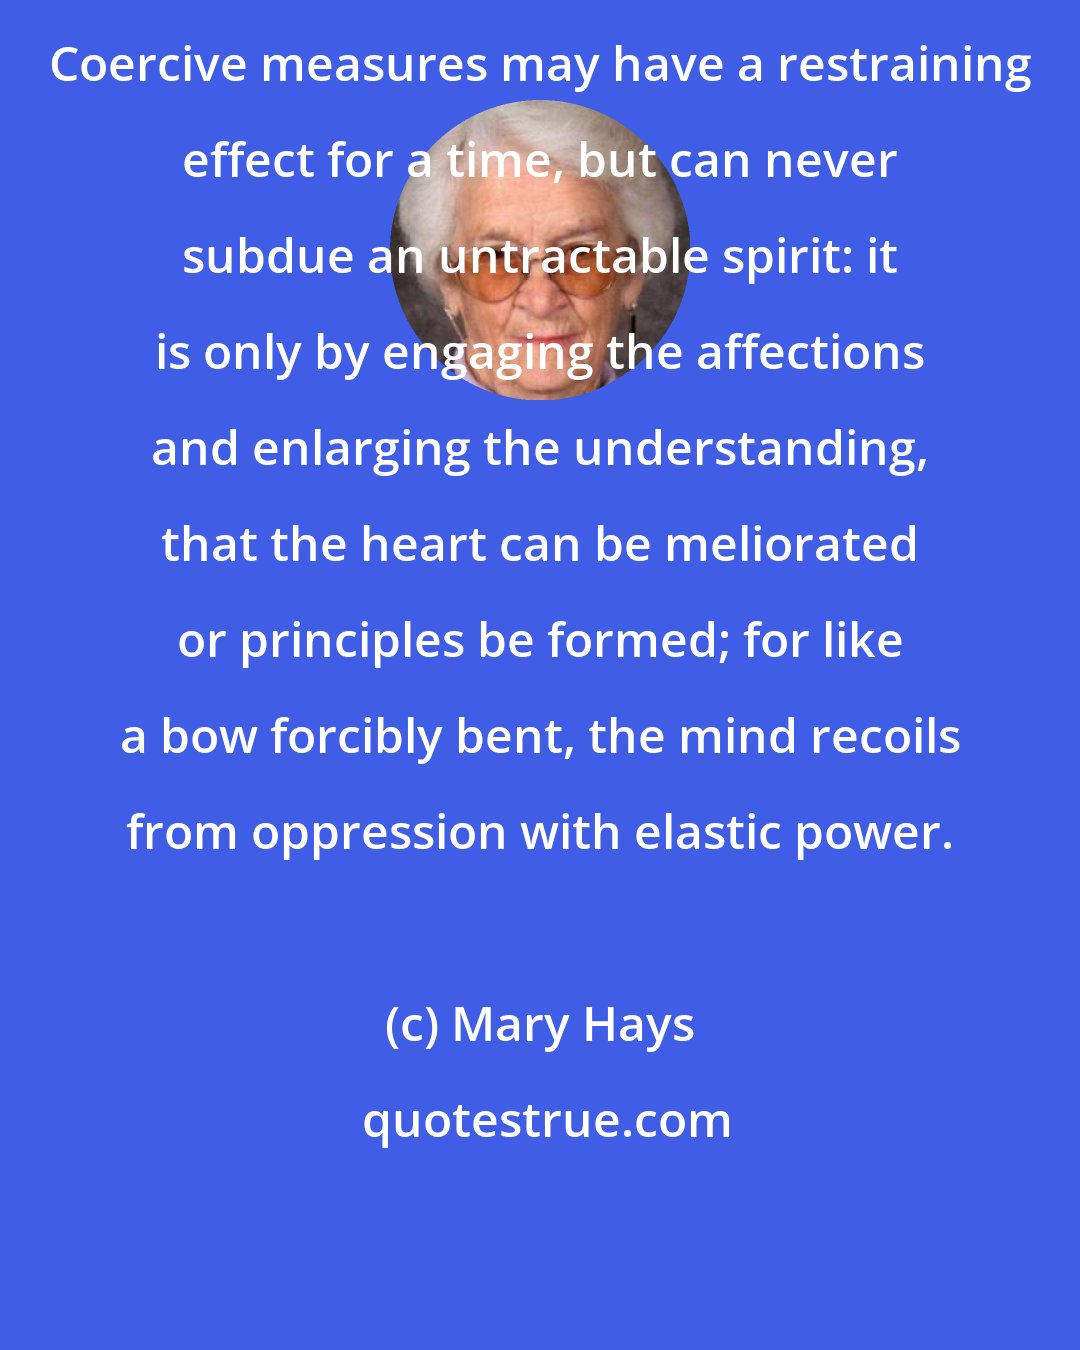 Mary Hays: Coercive measures may have a restraining effect for a time, but can never subdue an untractable spirit: it is only by engaging the affections and enlarging the understanding, that the heart can be meliorated or principles be formed; for like a bow forcibly bent, the mind recoils from oppression with elastic power.